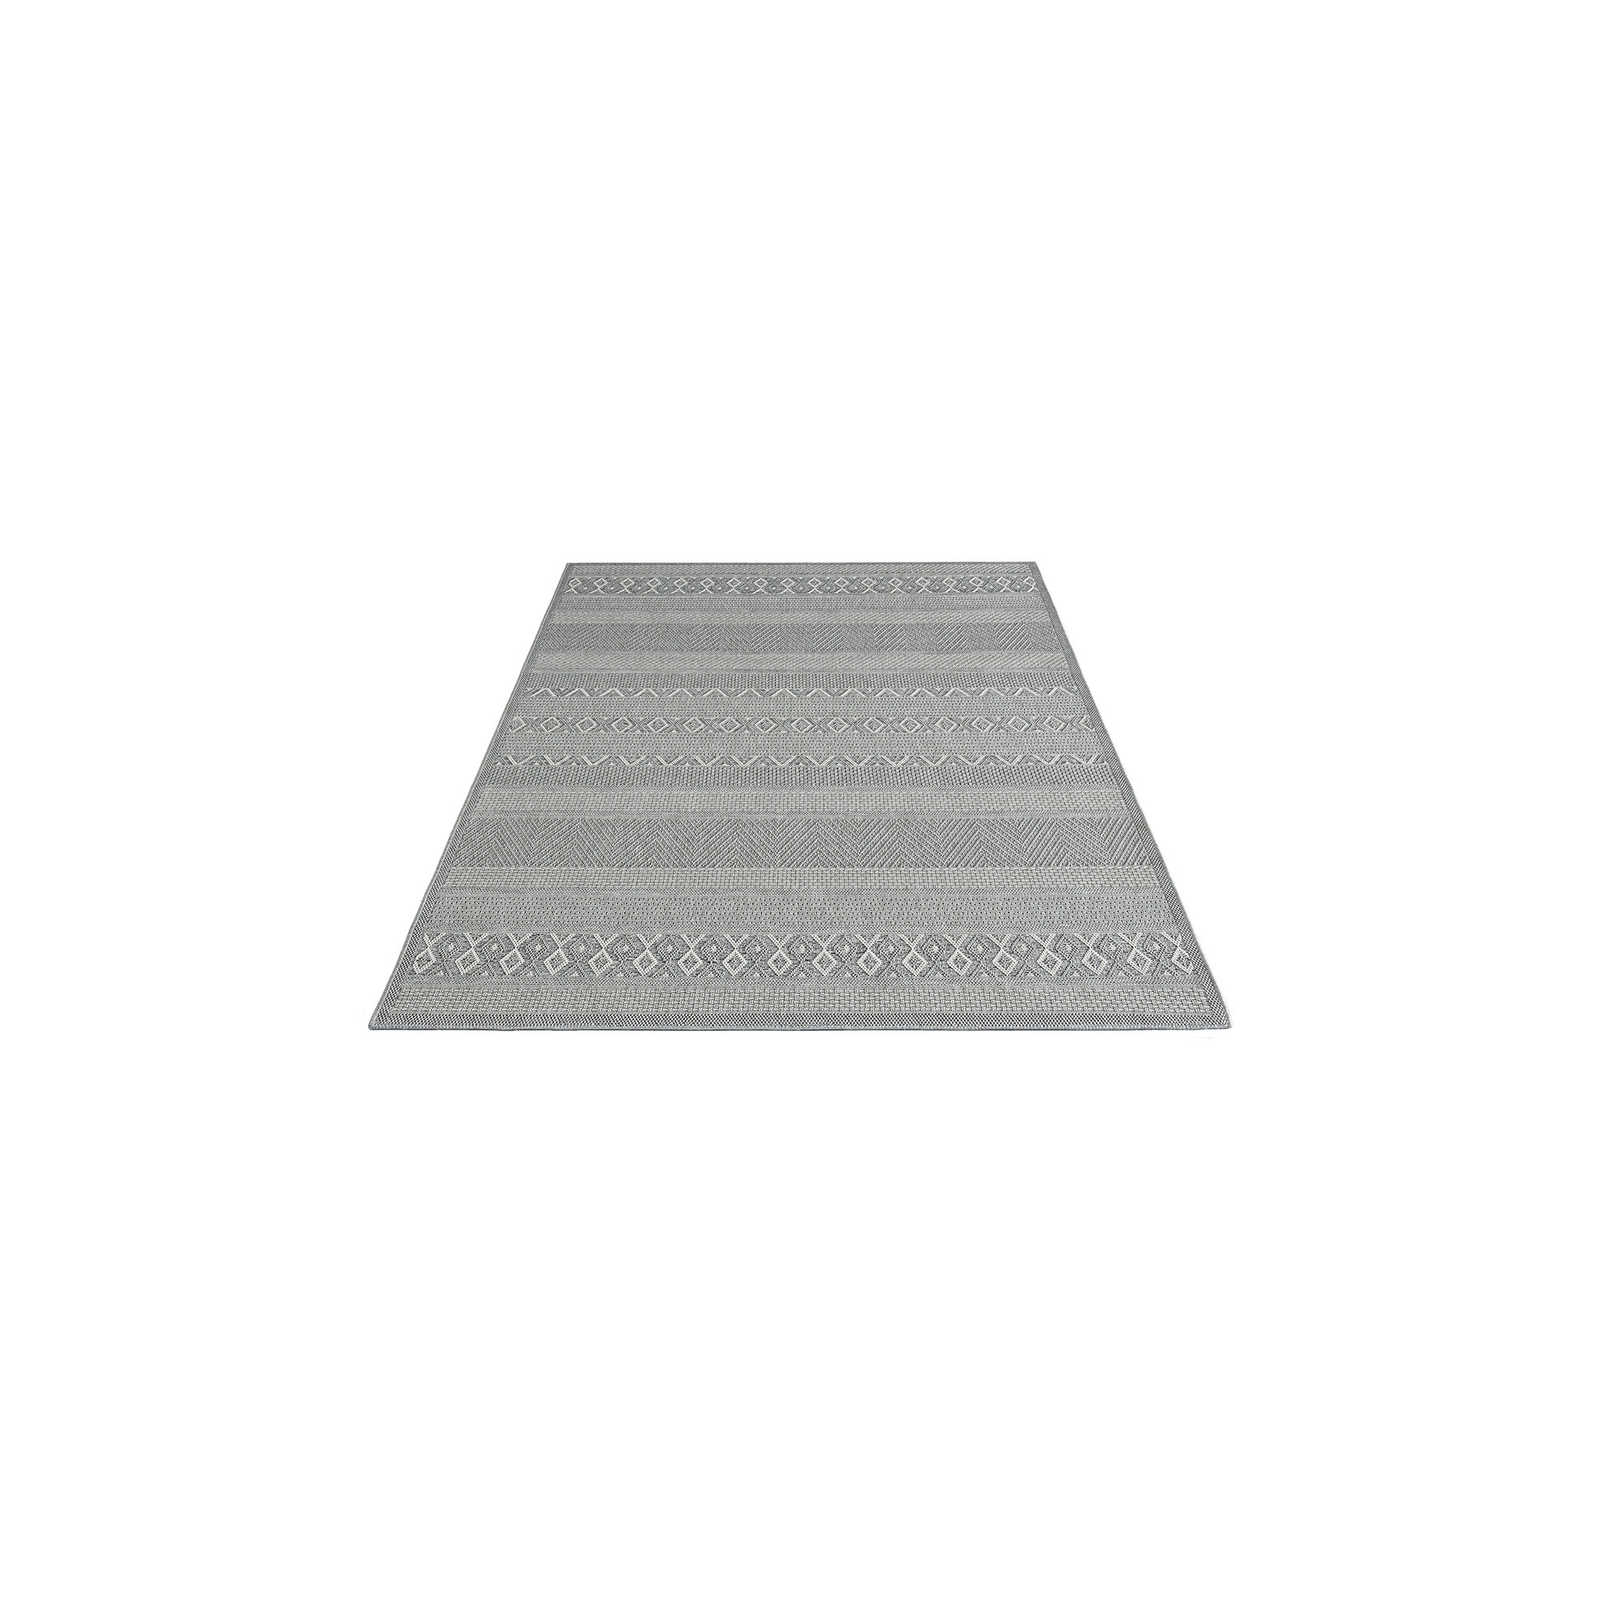 Simple Patterned Outdoor Rug in Grey - 160 x 120 cm
